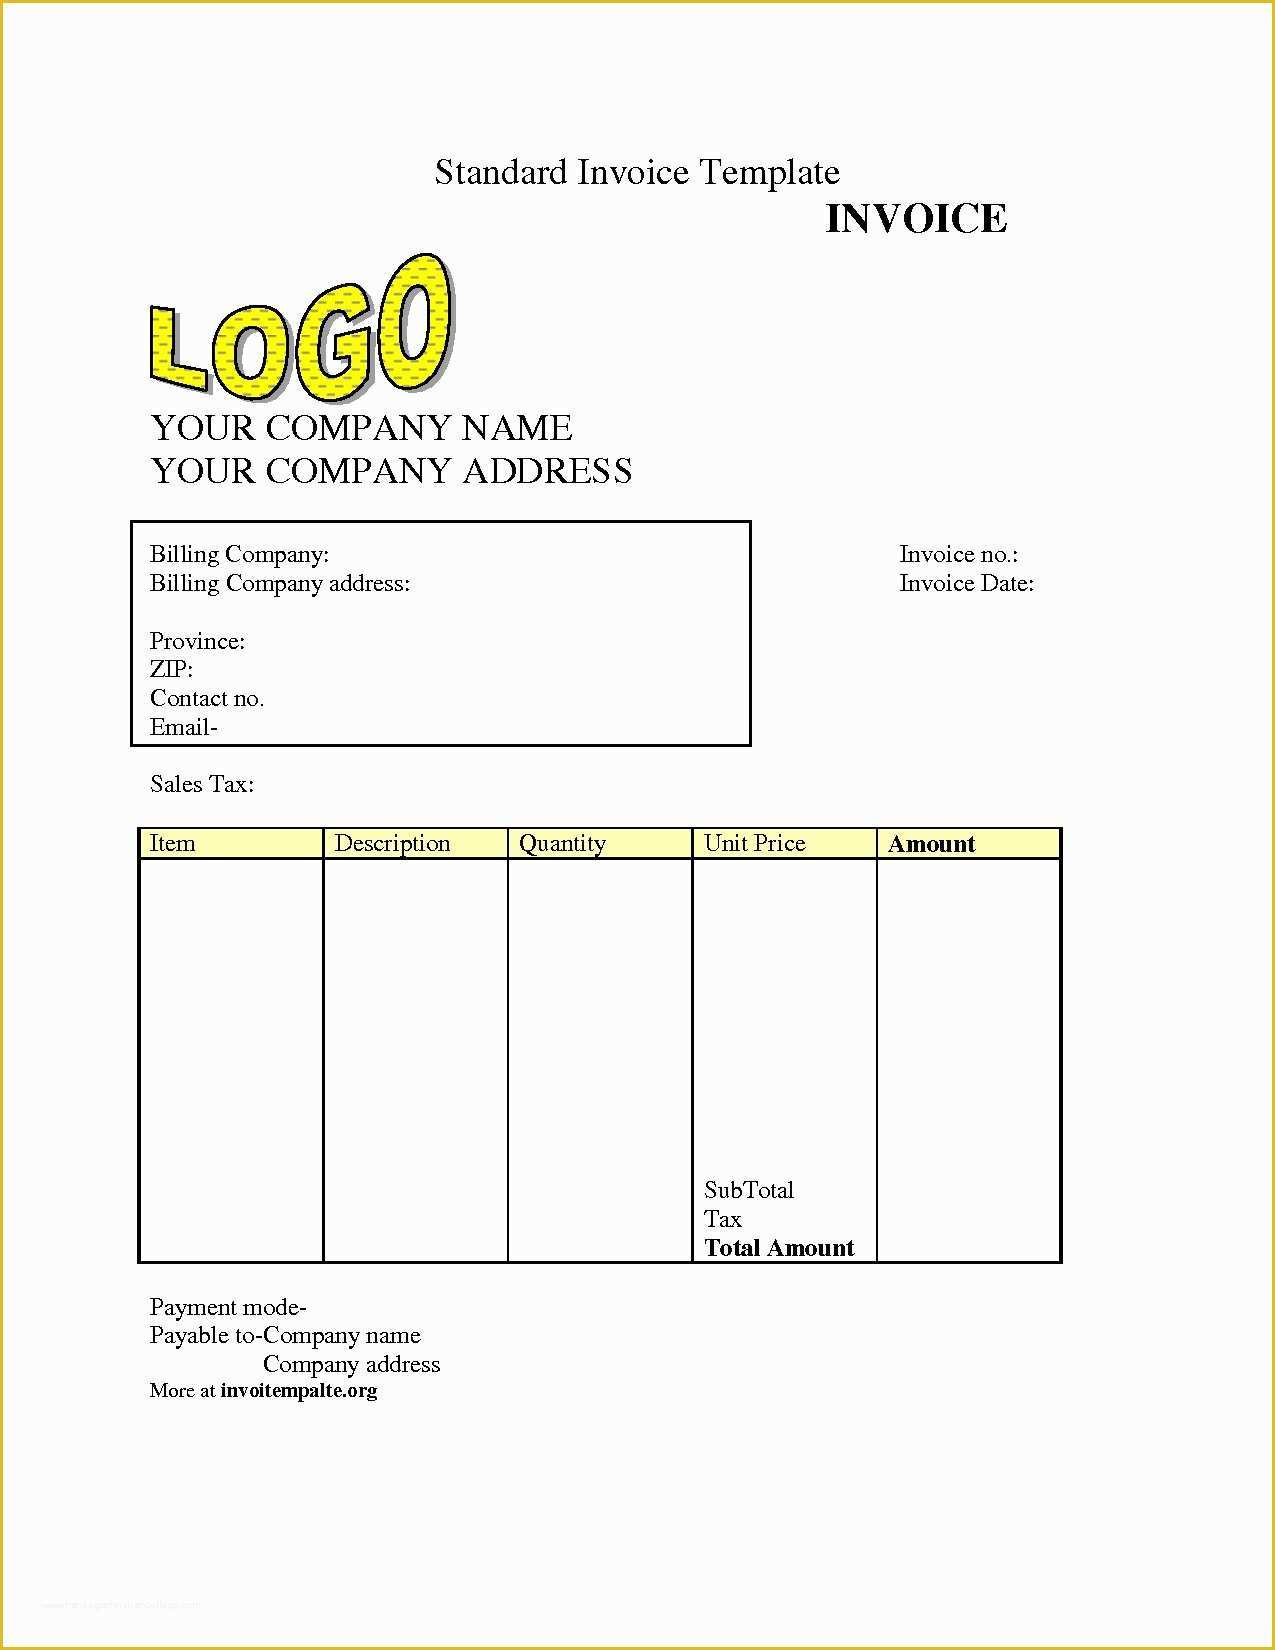 Creative Invoice Template Free Download Of Invoice Template Download Free Invoice Template Ideas